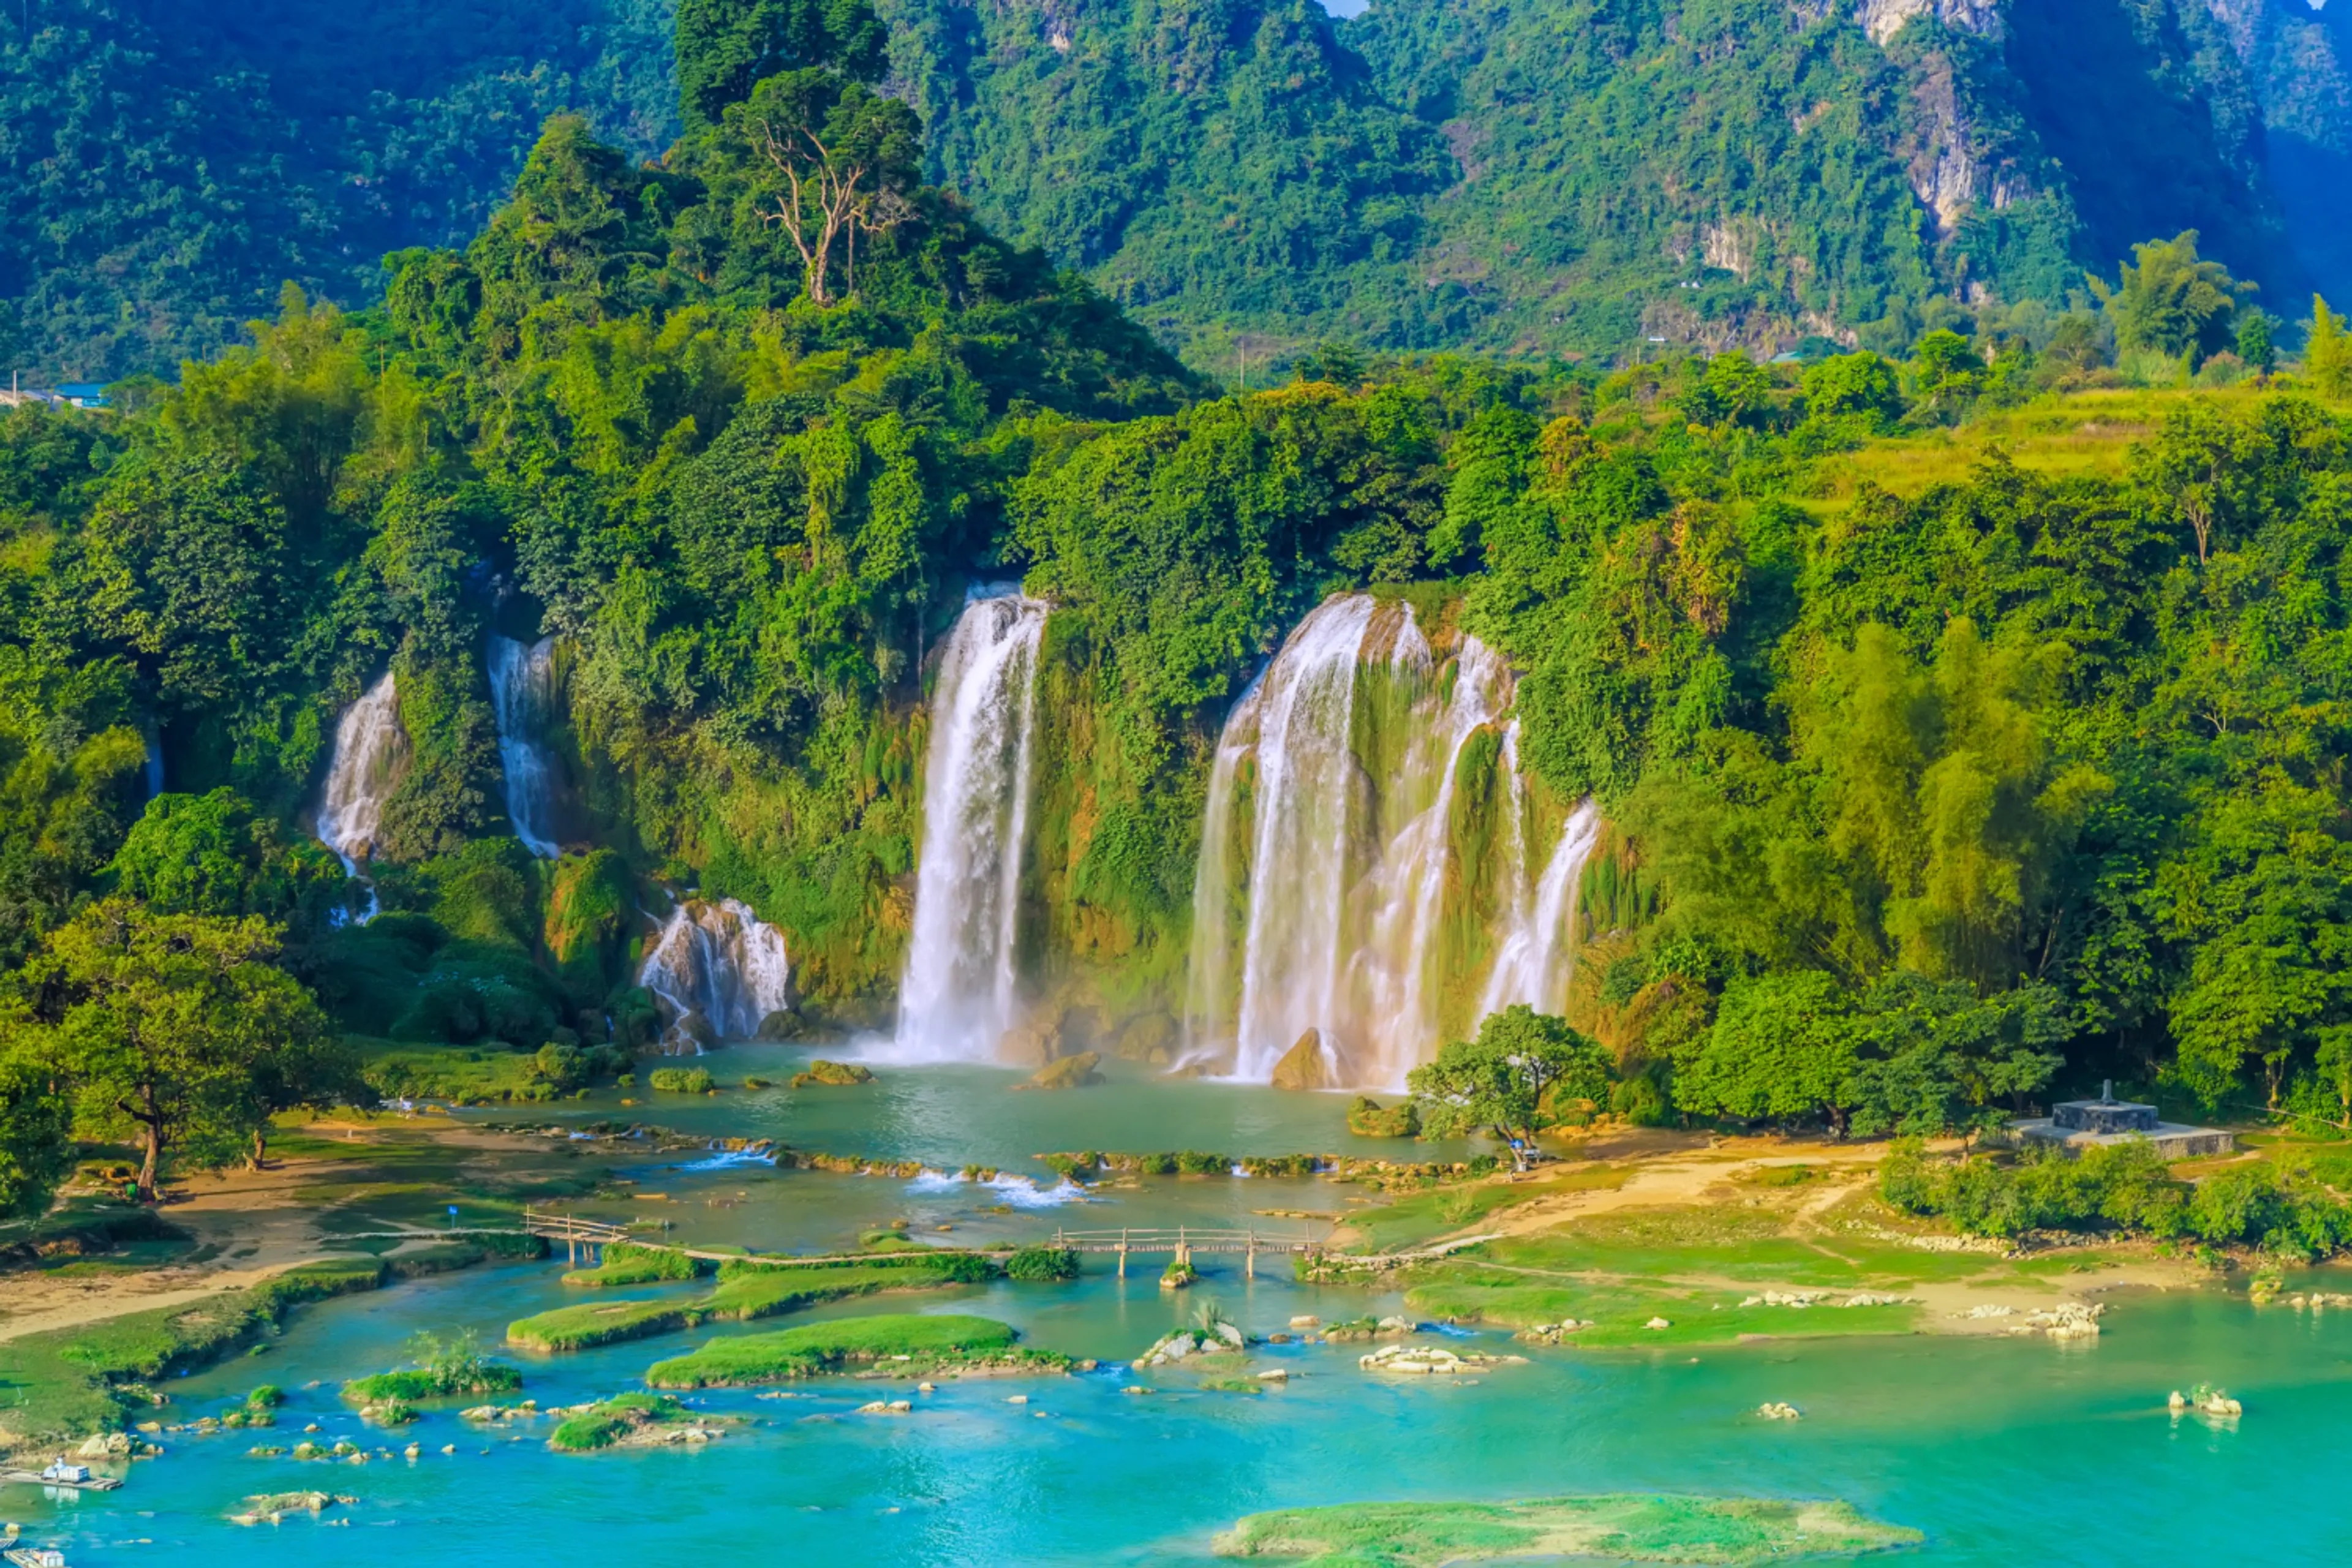 A Guide to Ban Gioc Falls in Vietnam